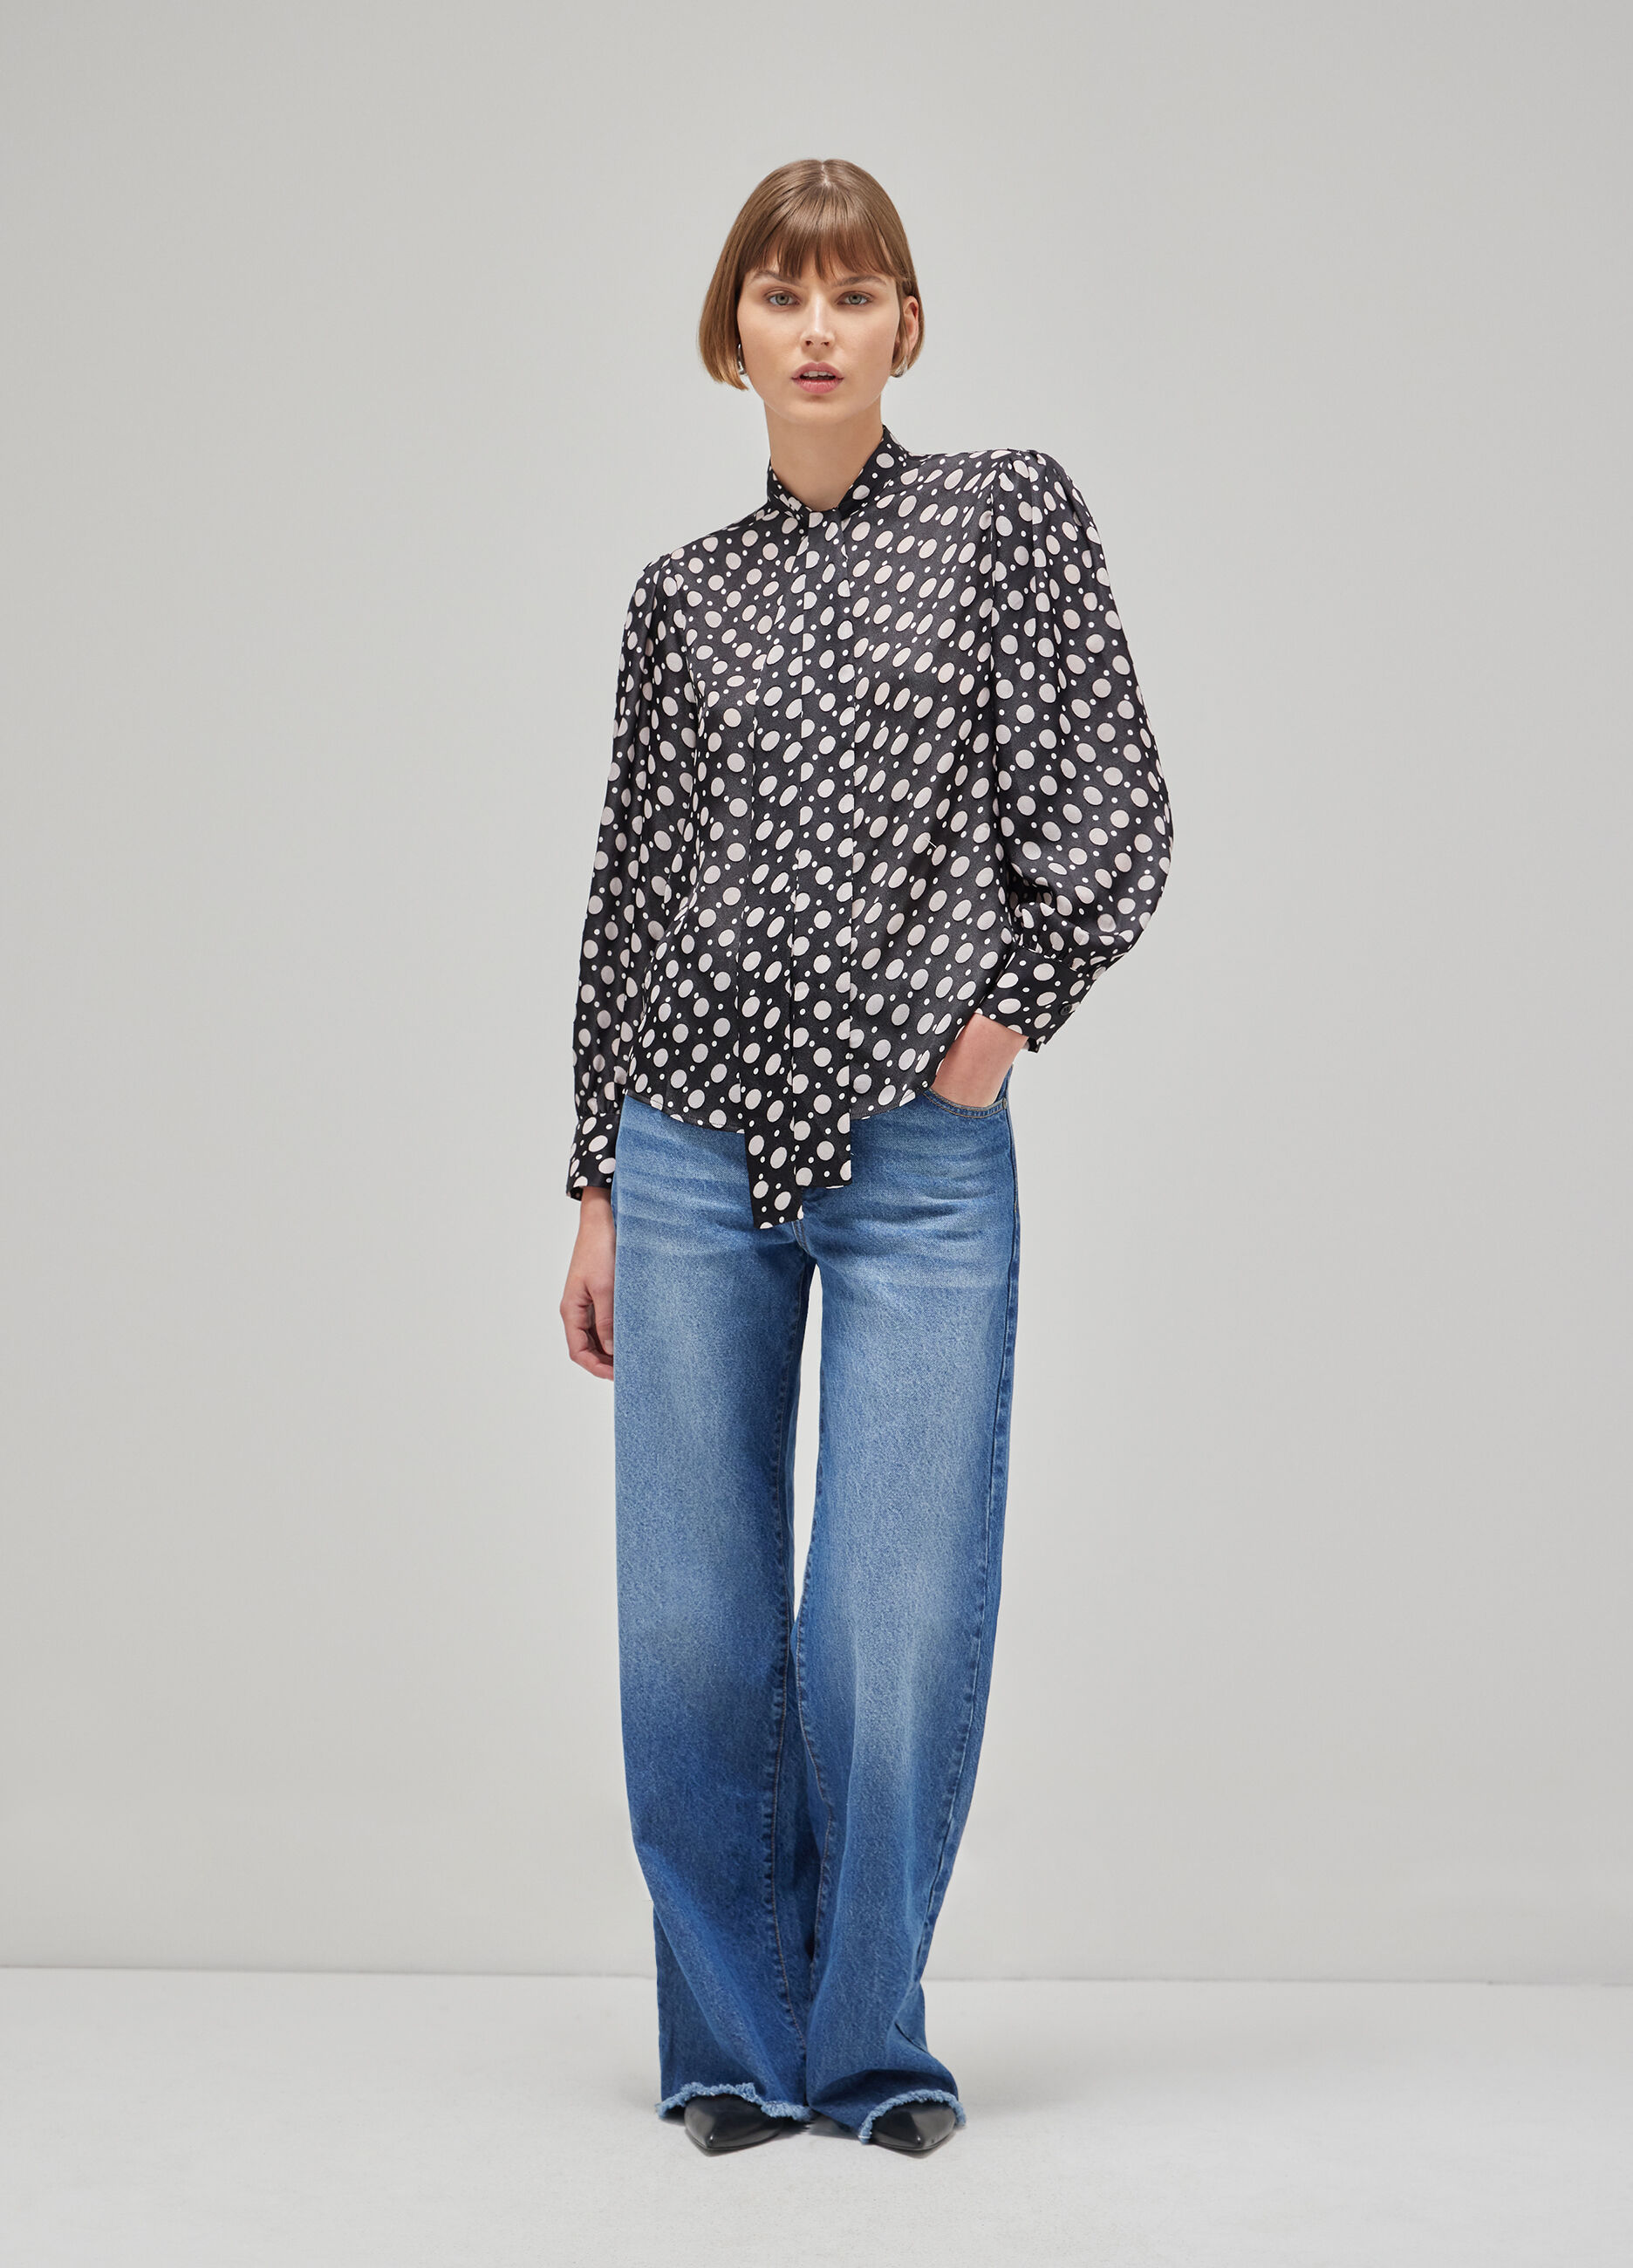 Viscose blend shirt with neck bow